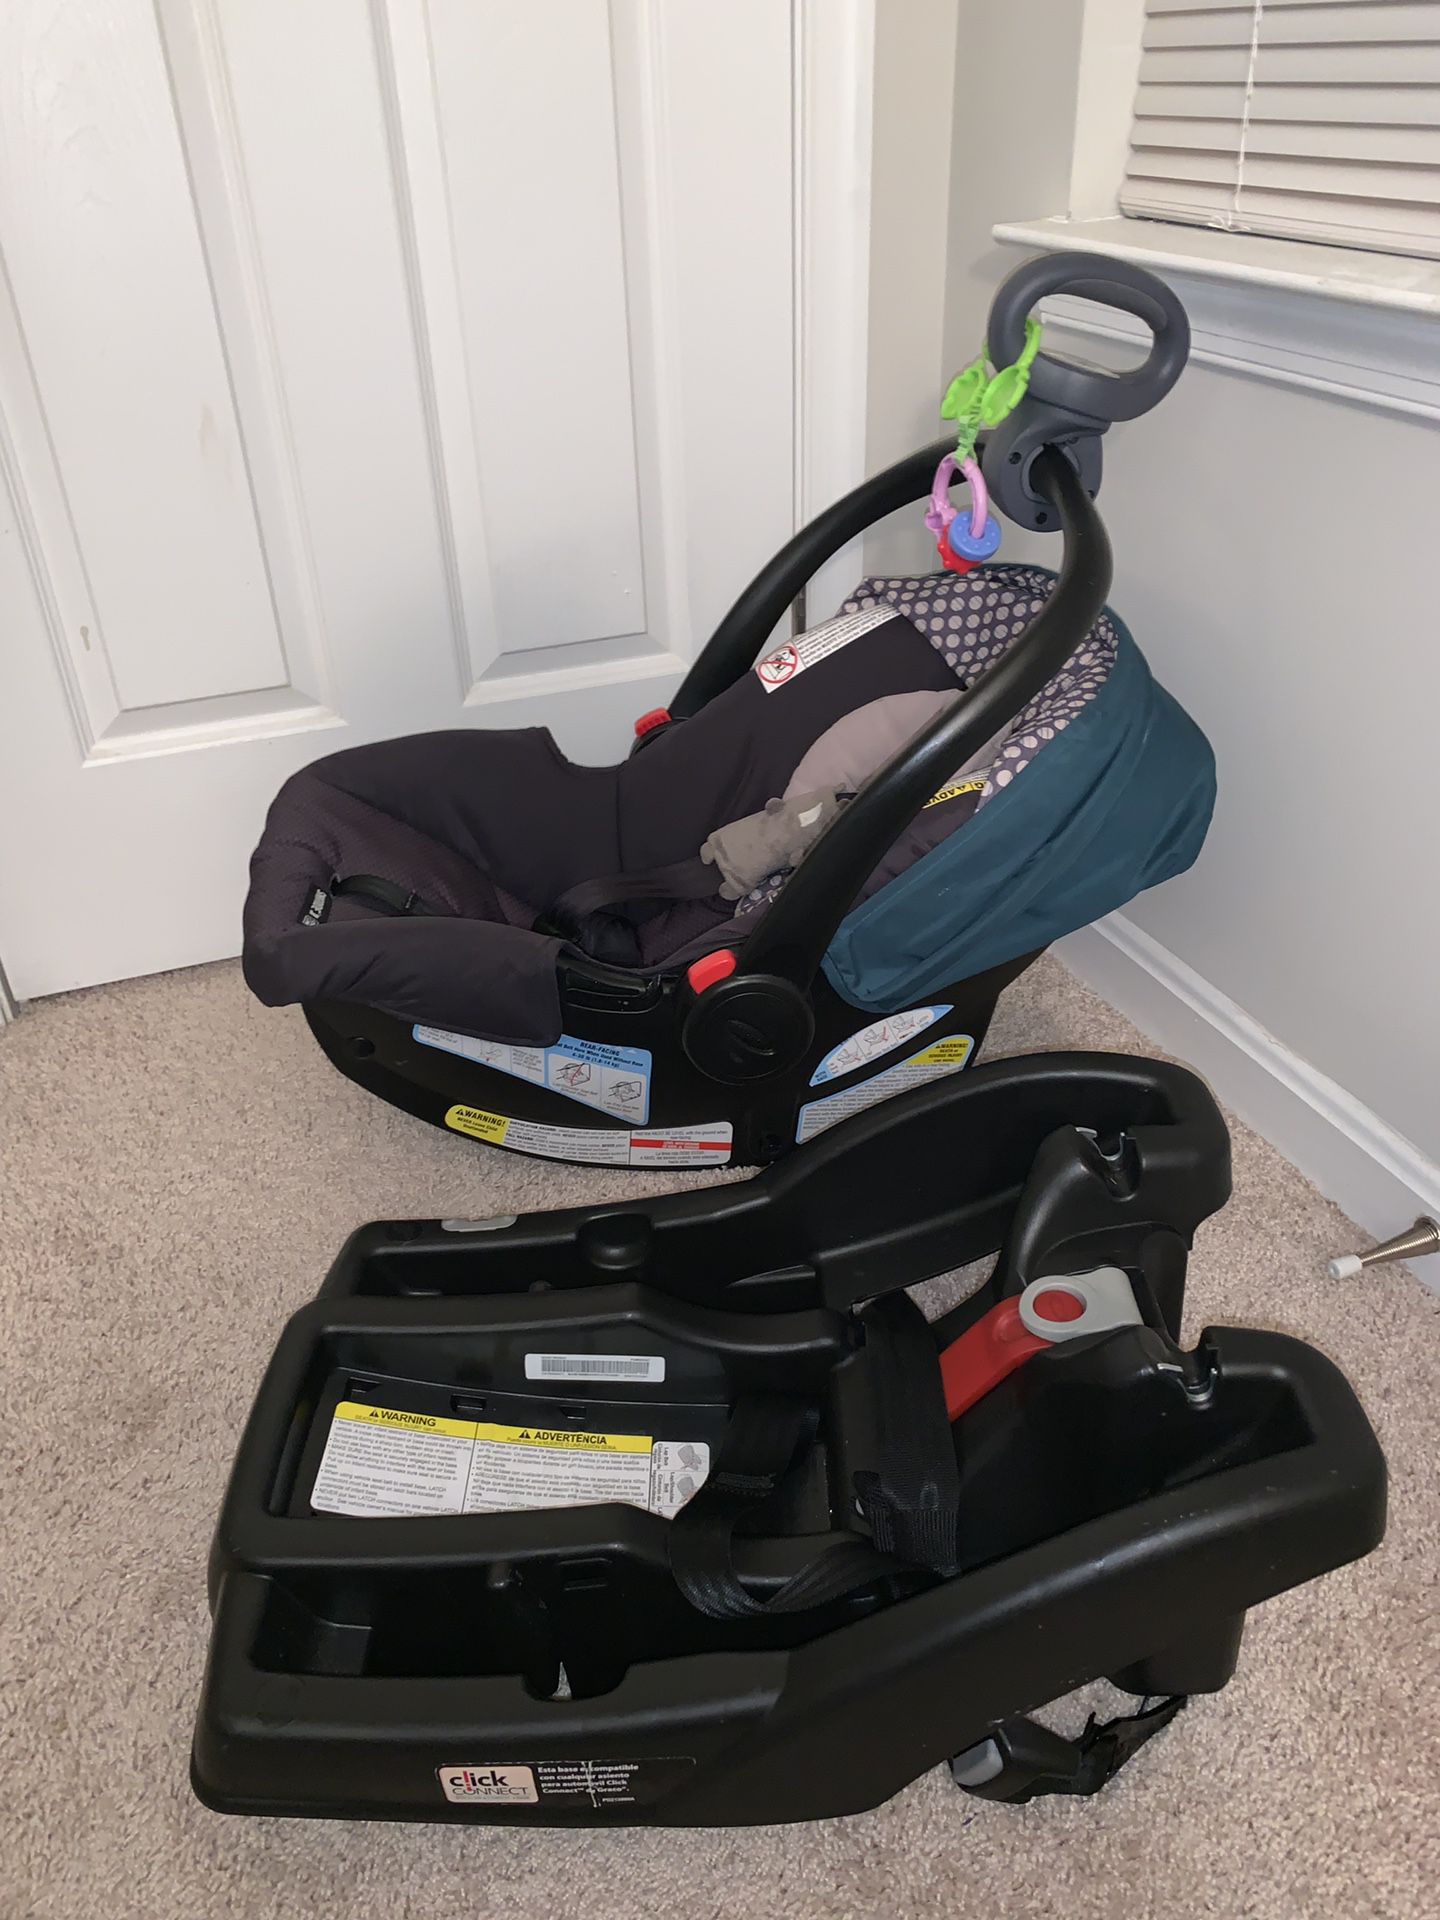 Graco's SnugRide Click Connect 30 Infant Car Seat and base